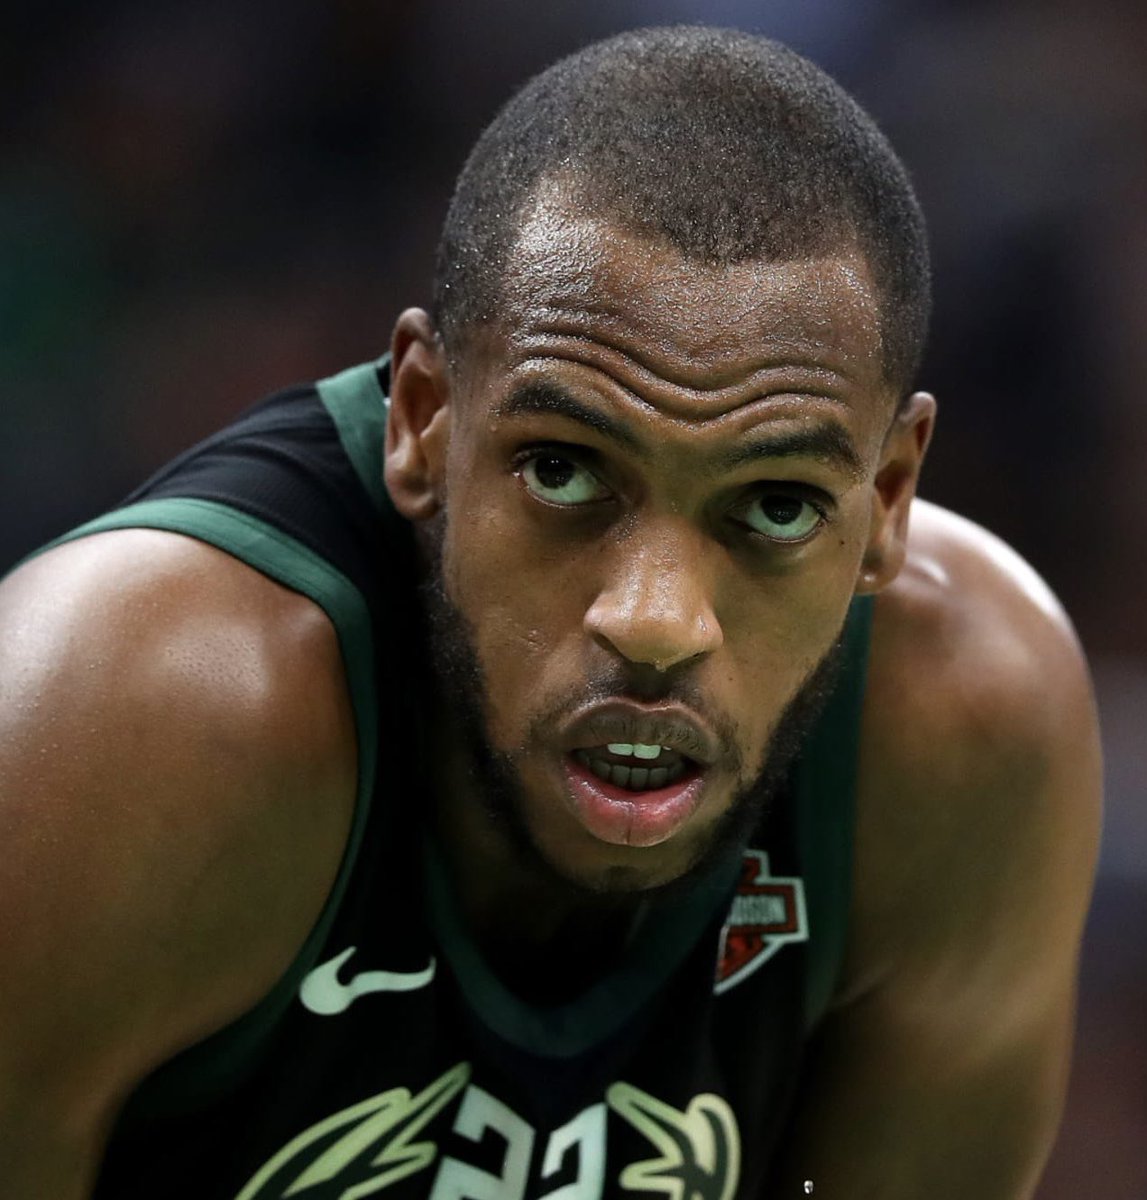 Khris Middleton never flirted with other teams. He never acted like he wanted to be elsewhere for leverage. There was no drama when he had to change his game and take a backseat to Dame. He is the most loyal and professional star you could ever ask for.